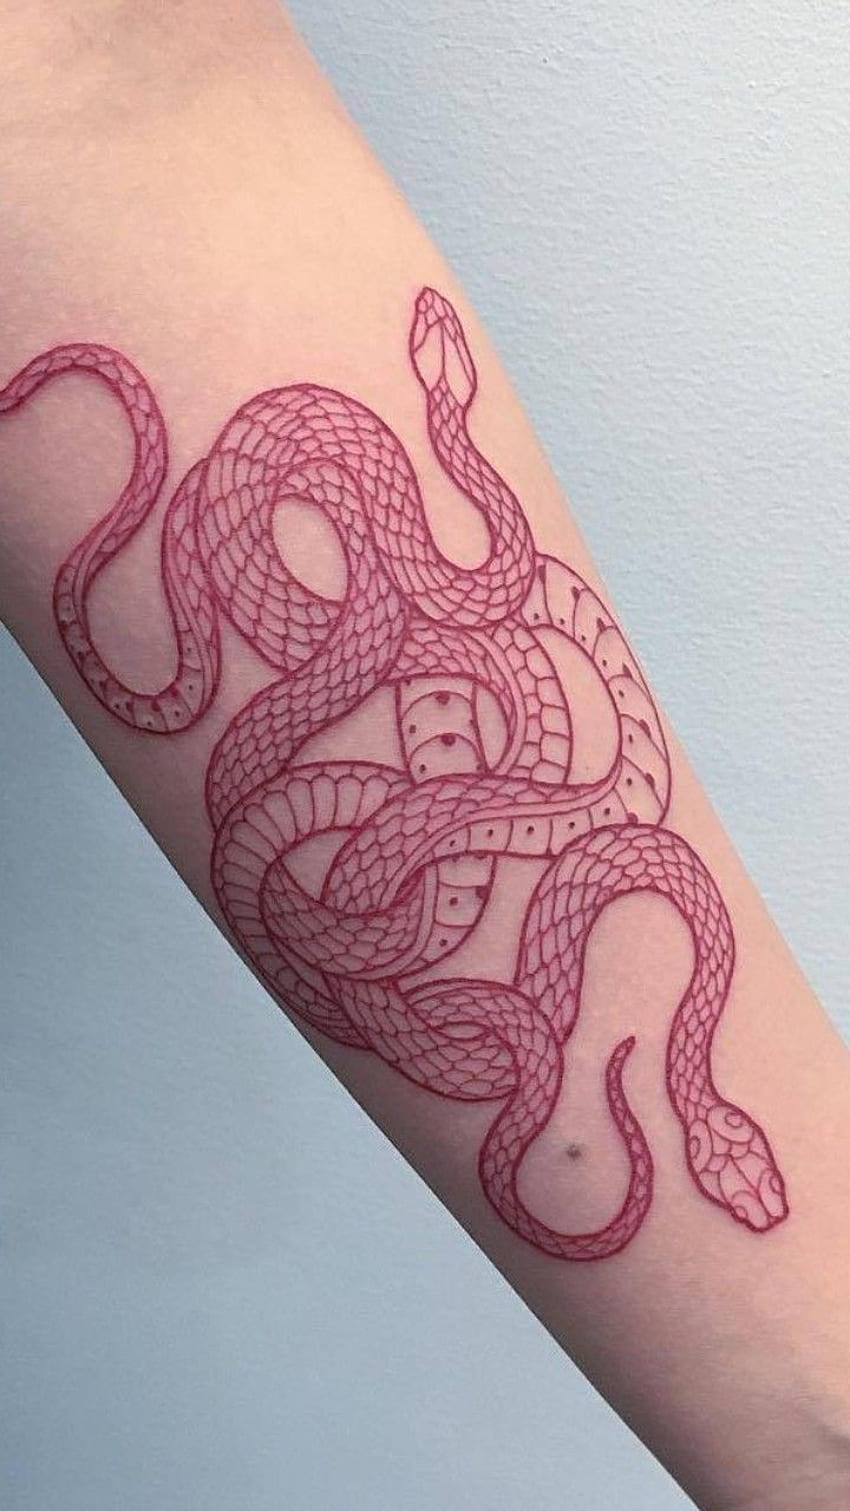 American Tattoo  Red Snake Linework Color by Scott Ink Tattoos  LineworkColorTattoo lineworktattoo snaketattoo AmericanTattoo  RedTattoo  Facebook